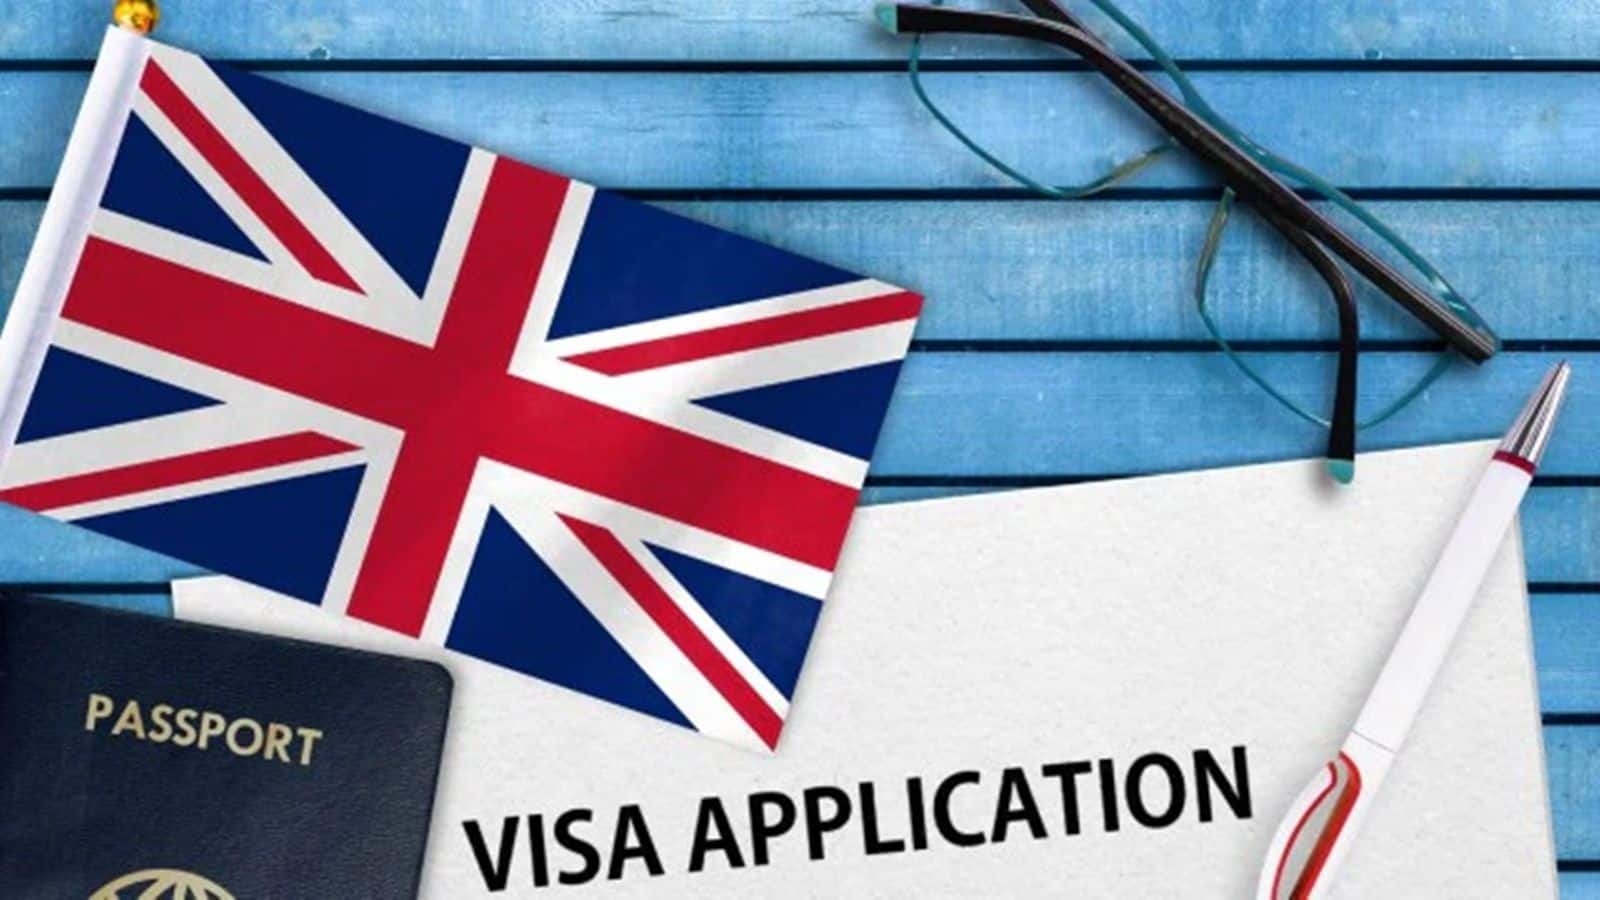 What are UK's new visa rules? Do they affect Indians?